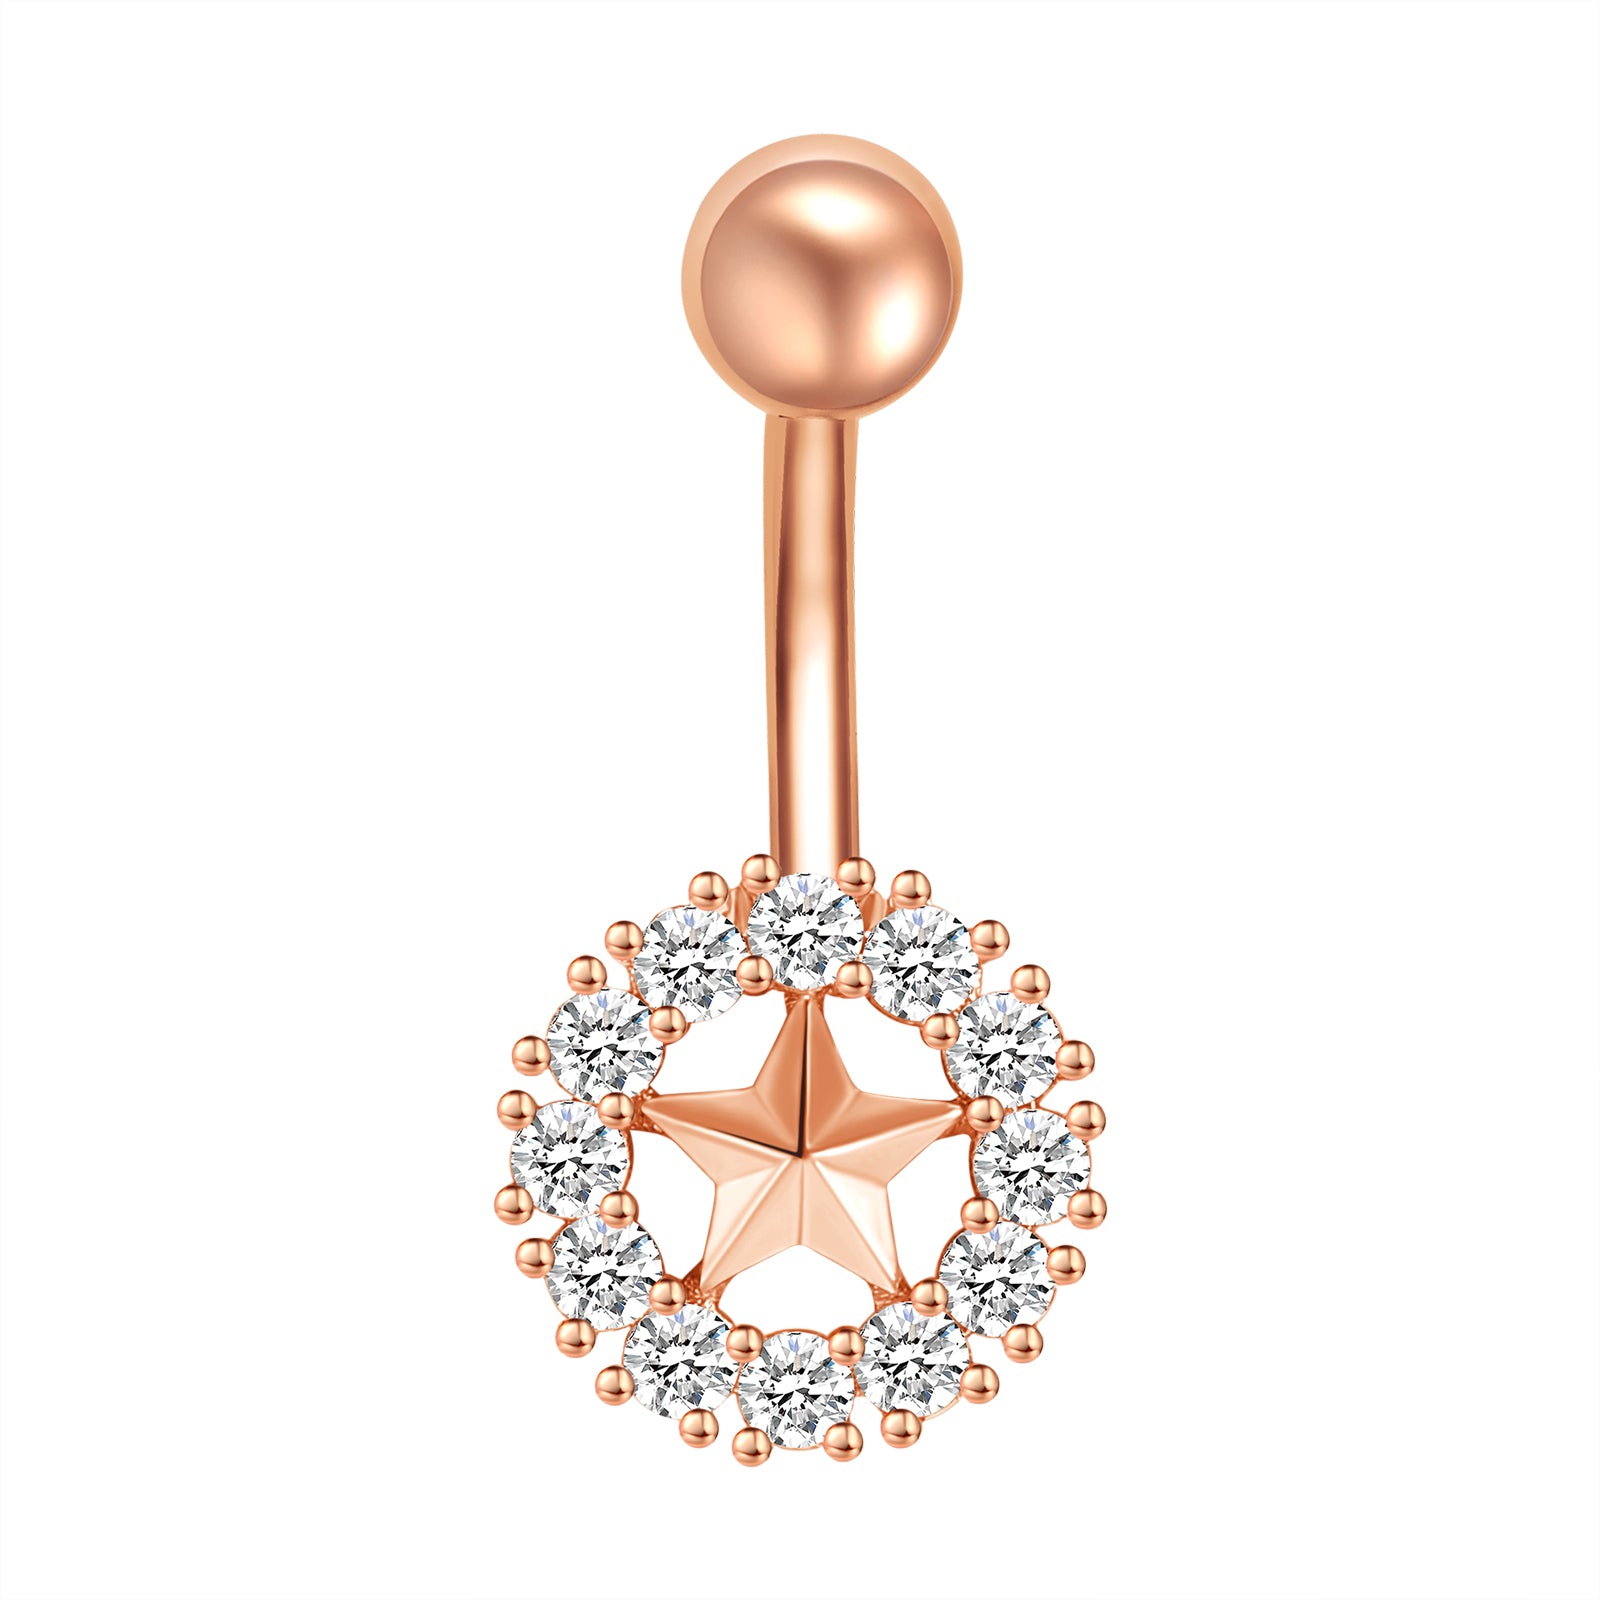 14g-Pretty-Star-Belly-Button-Rings-Rose-Gold-Cubic-Zirconia-Belly-Piercing-Jewelry